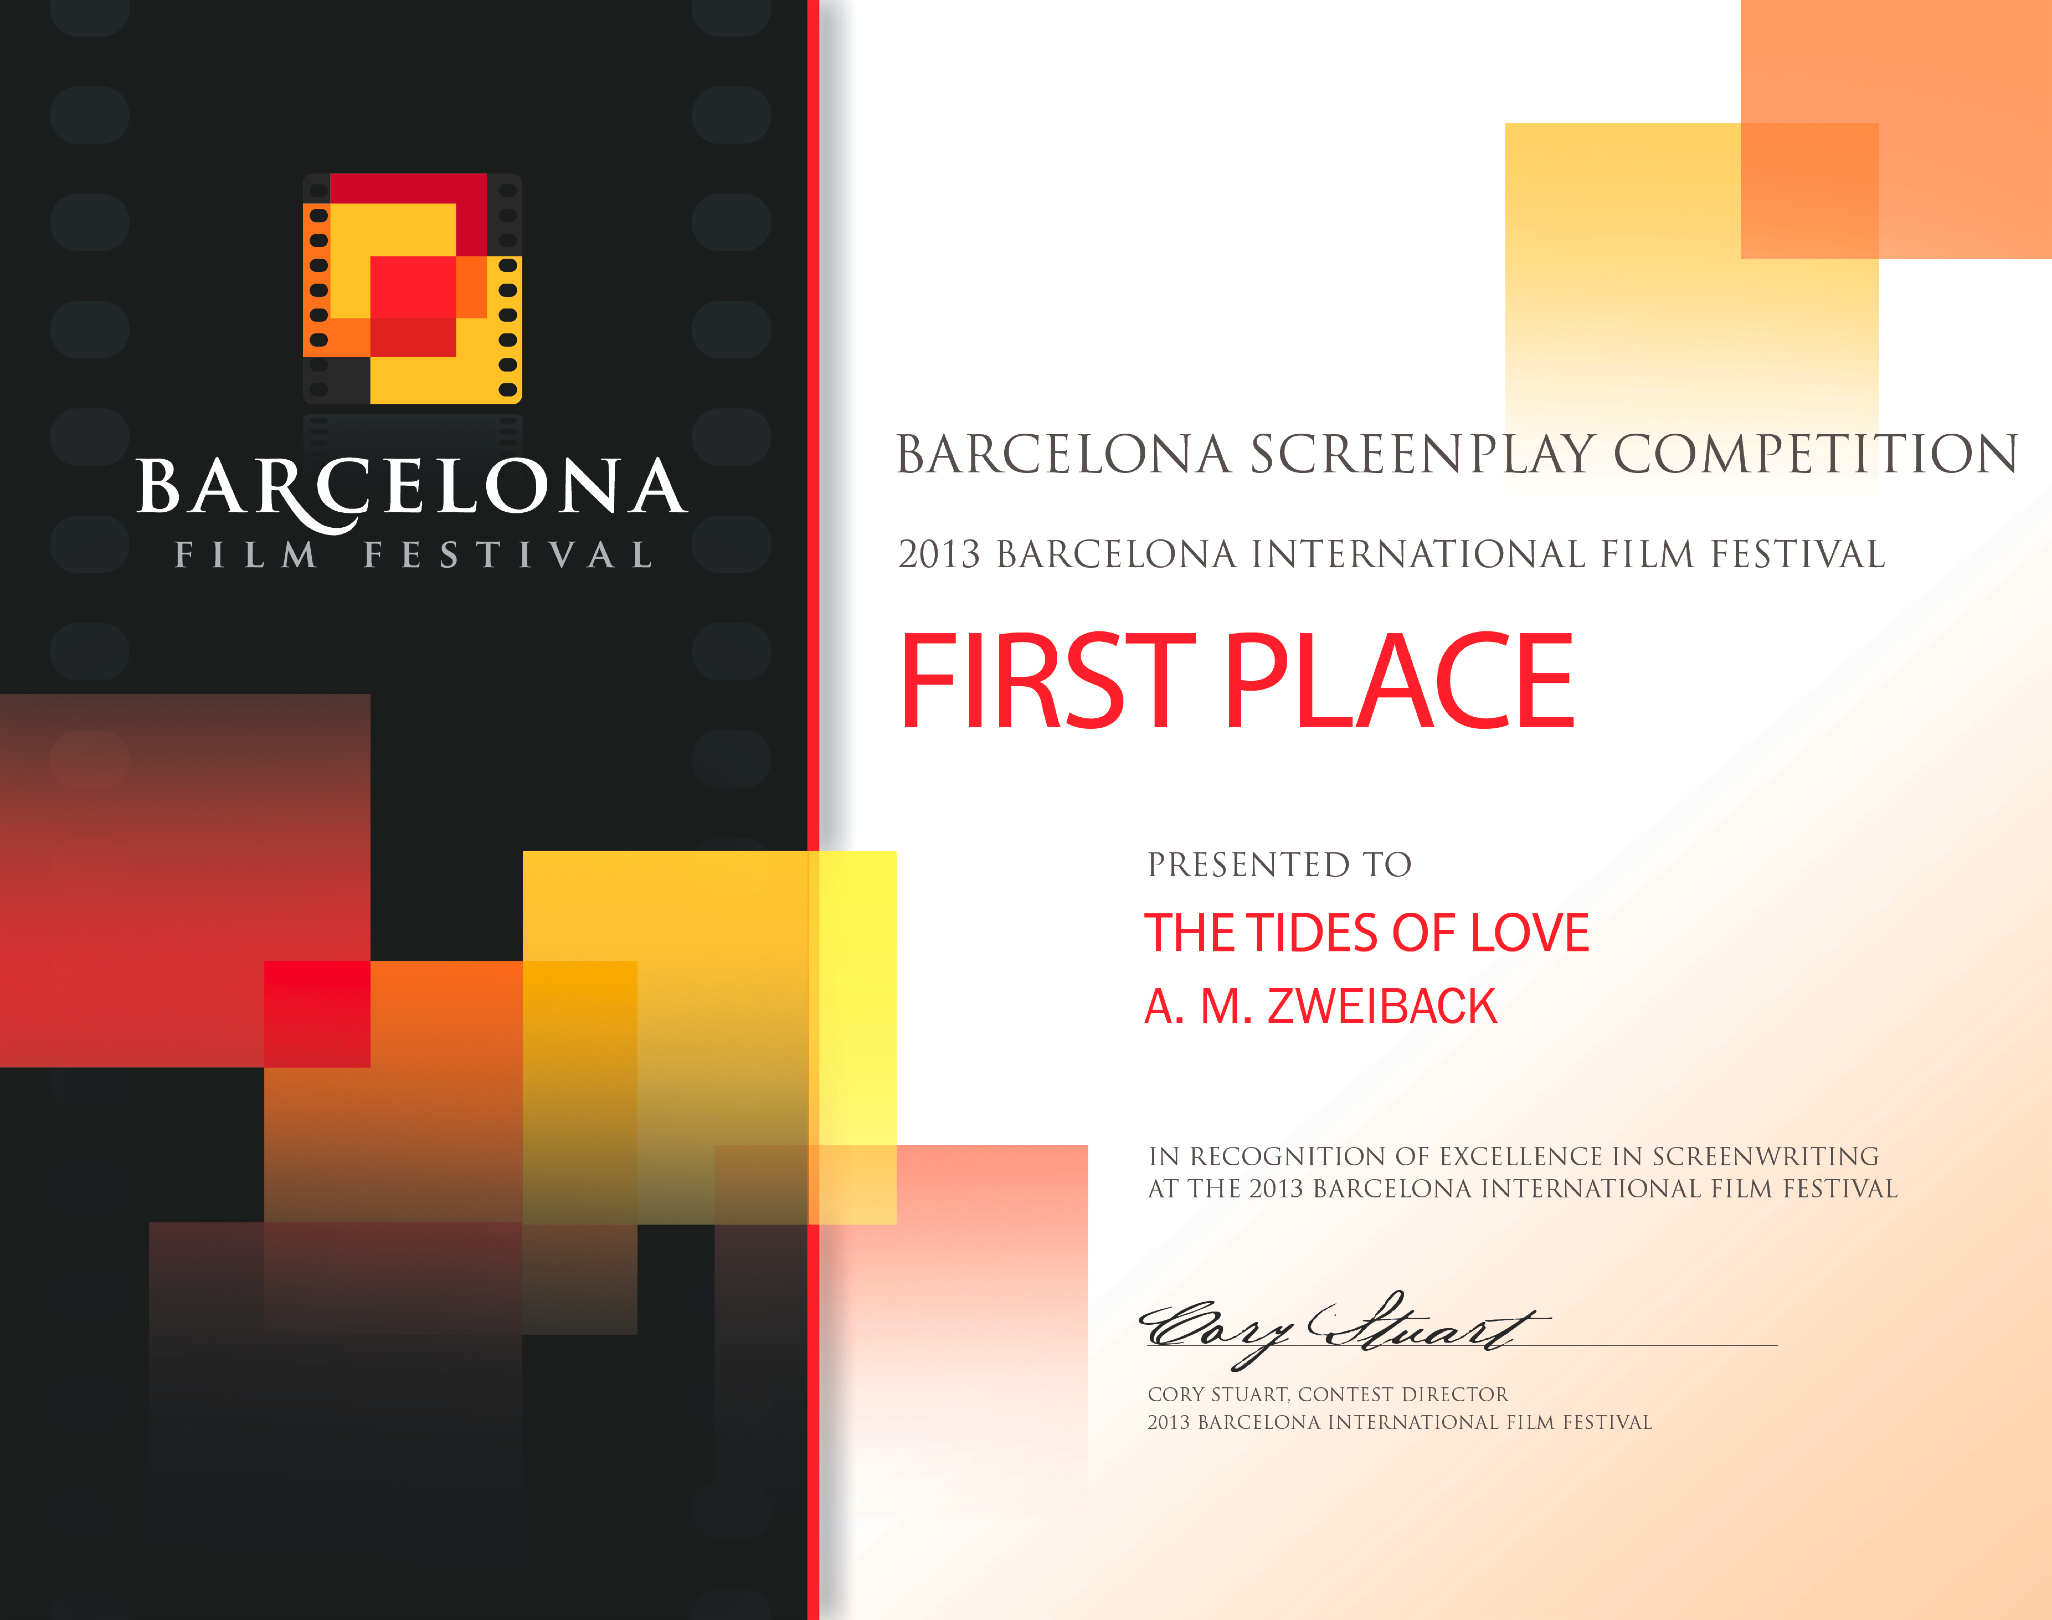 FIRST PLACE WINNER at 2013 BARCELONA SCREENPLAY COMPETITION - THE TIDES OF LOVE by AM ZWEIBACK